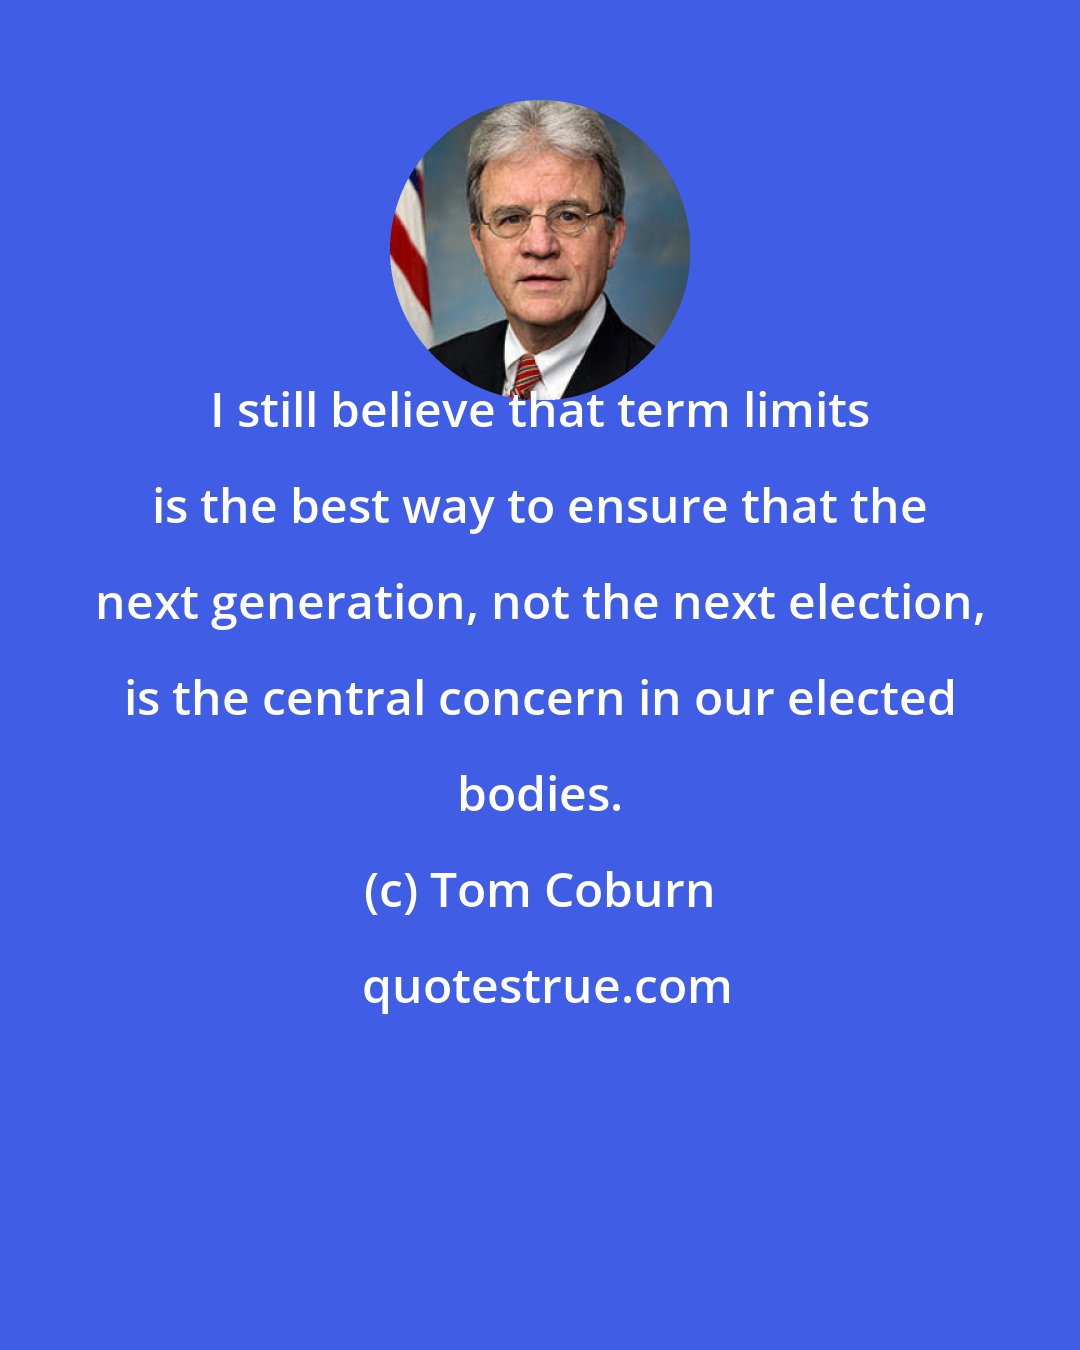 Tom Coburn: I still believe that term limits is the best way to ensure that the next generation, not the next election, is the central concern in our elected bodies.